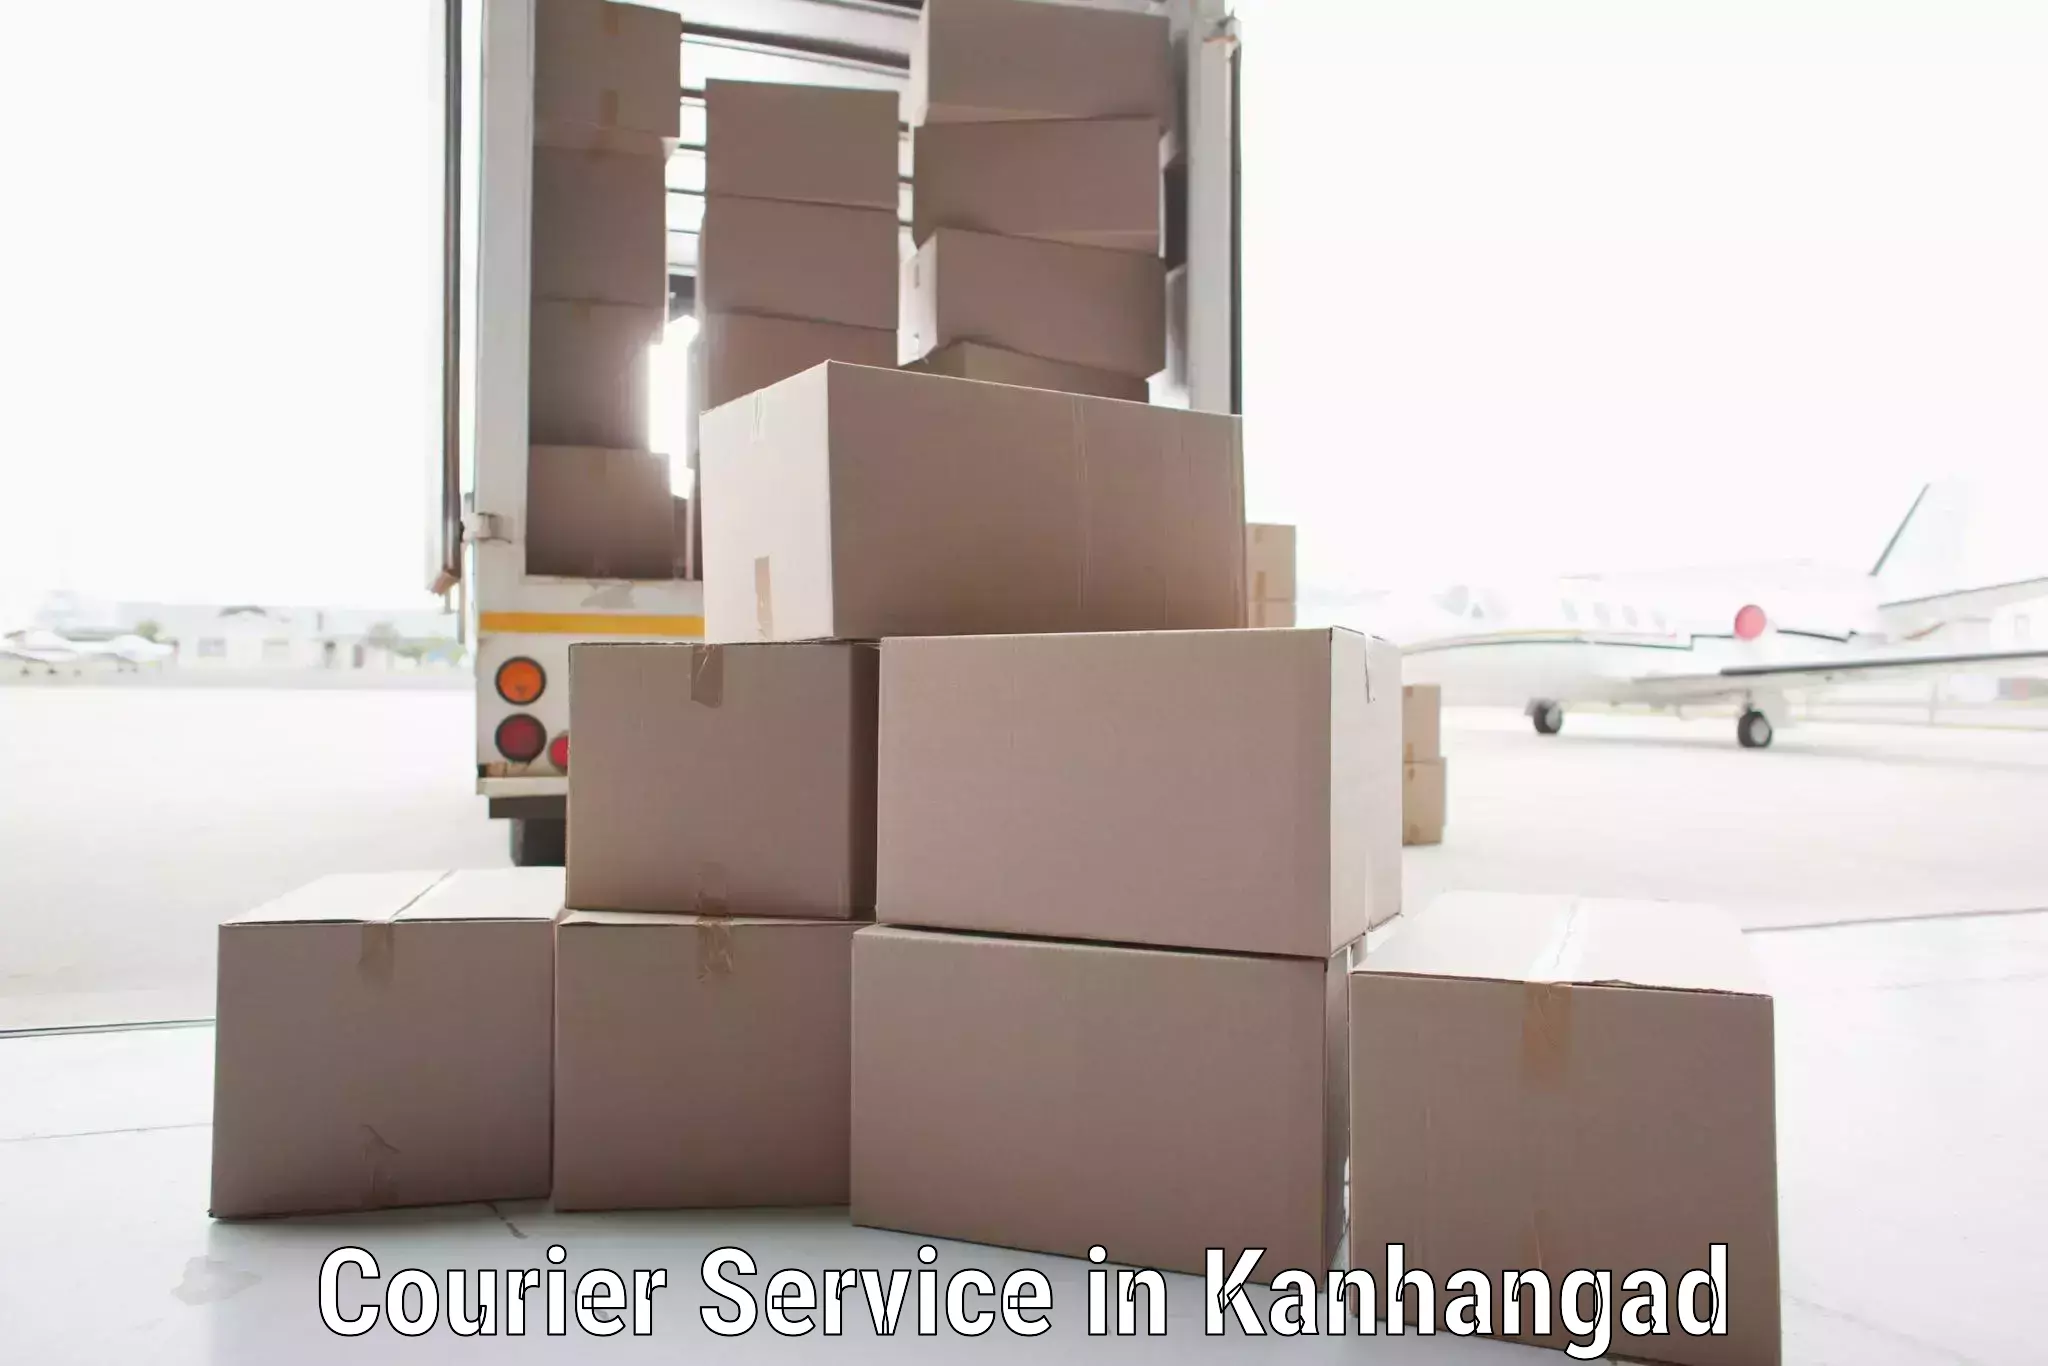 Same-day delivery solutions in Kanhangad